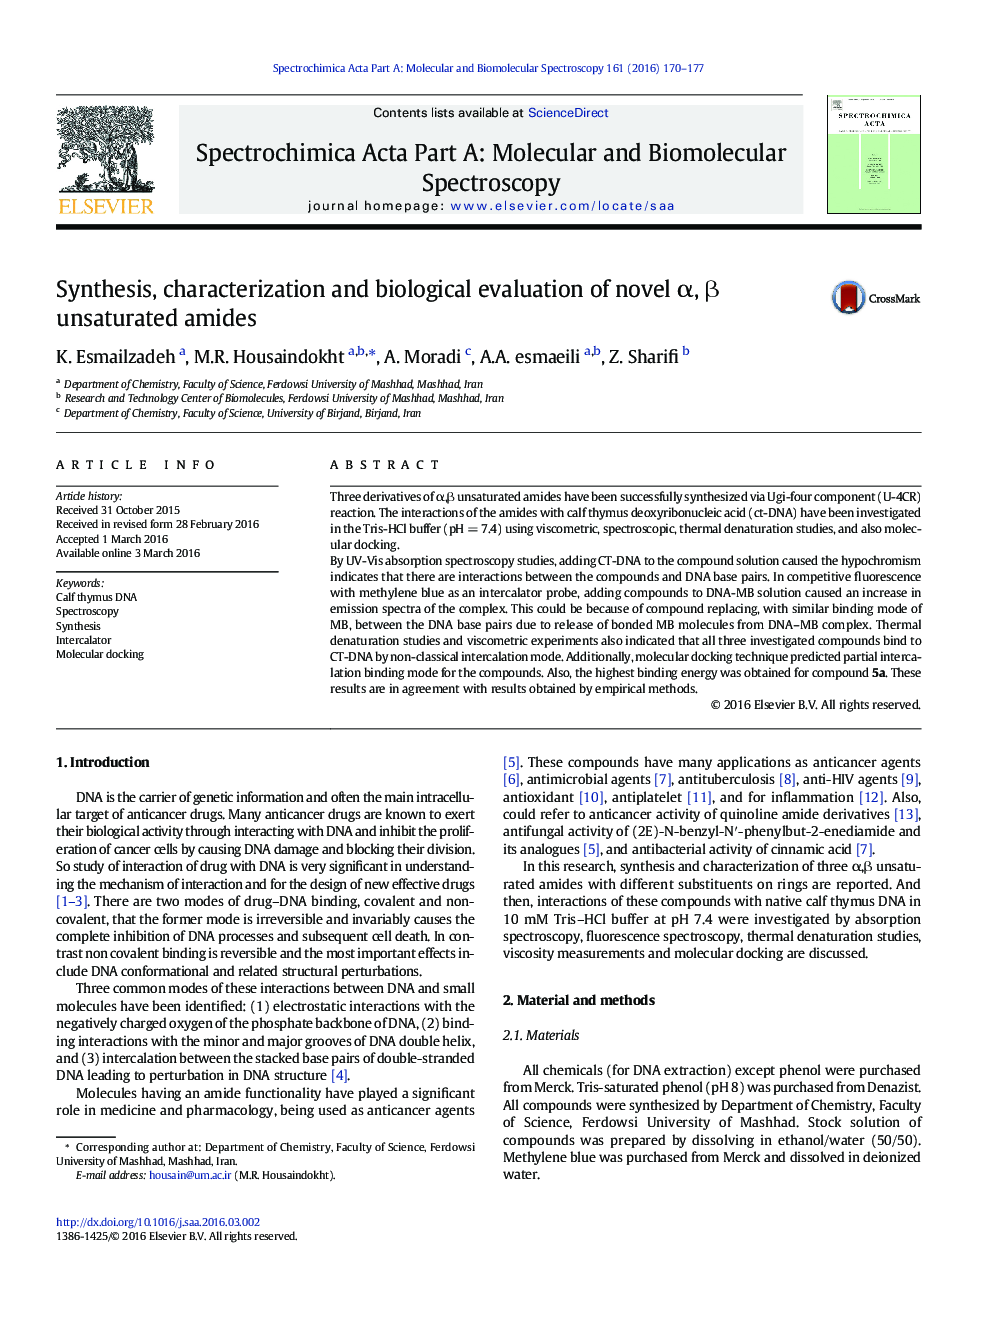 Synthesis, characterization and biological evaluation of novel α, β unsaturated amides